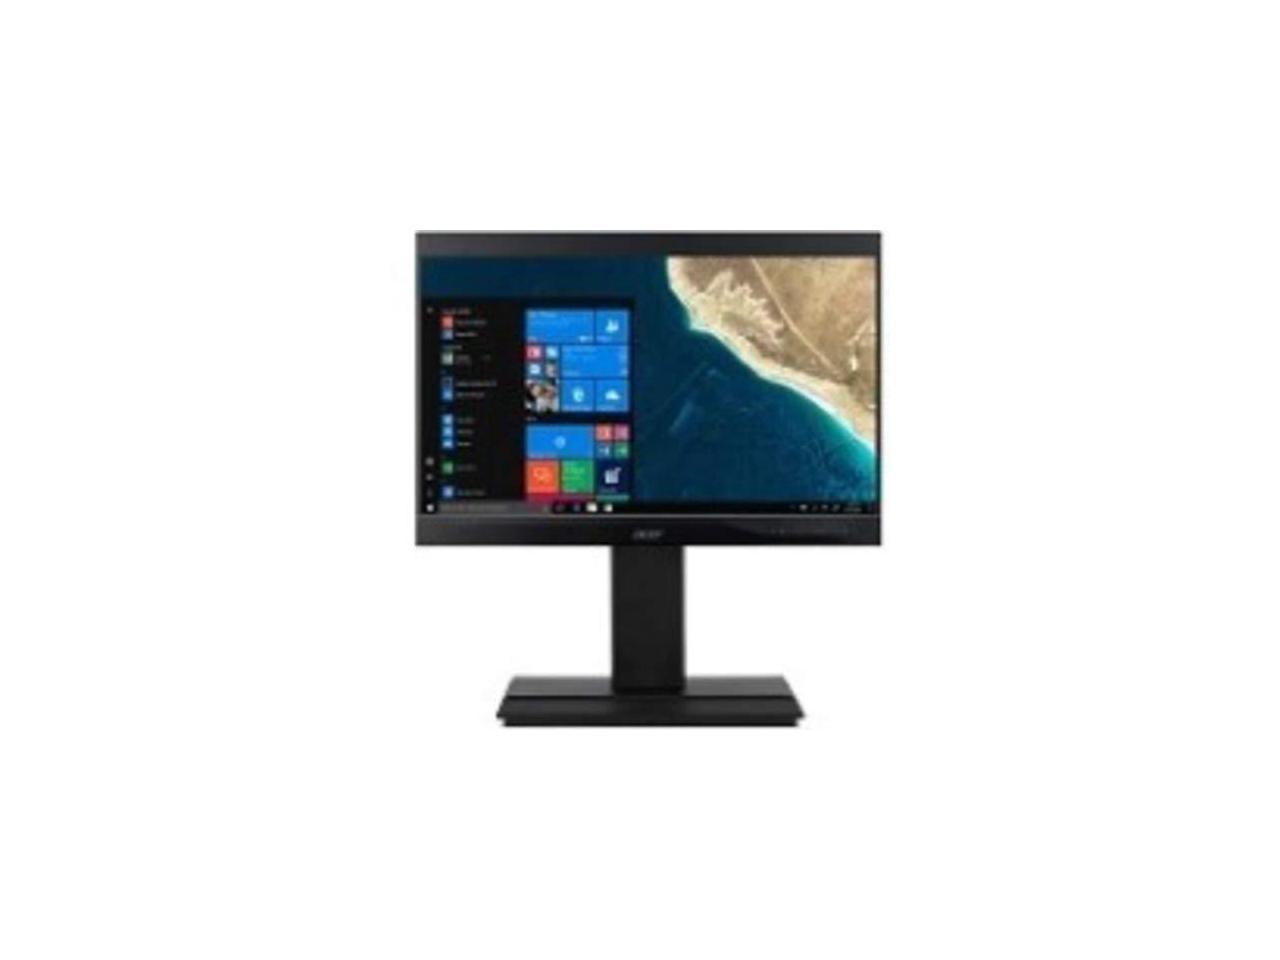 Acer Veriton Z4860G DQ.VRZAA.001 All-in-One Computer - Intel Core i5 (8th Gen) i5-8500 3 GHz - 8 GB DDR4 SDRAM - 1 TB HDD - 23.8" FHD Non-Touch Display - Windows 10 Pro 64-bit